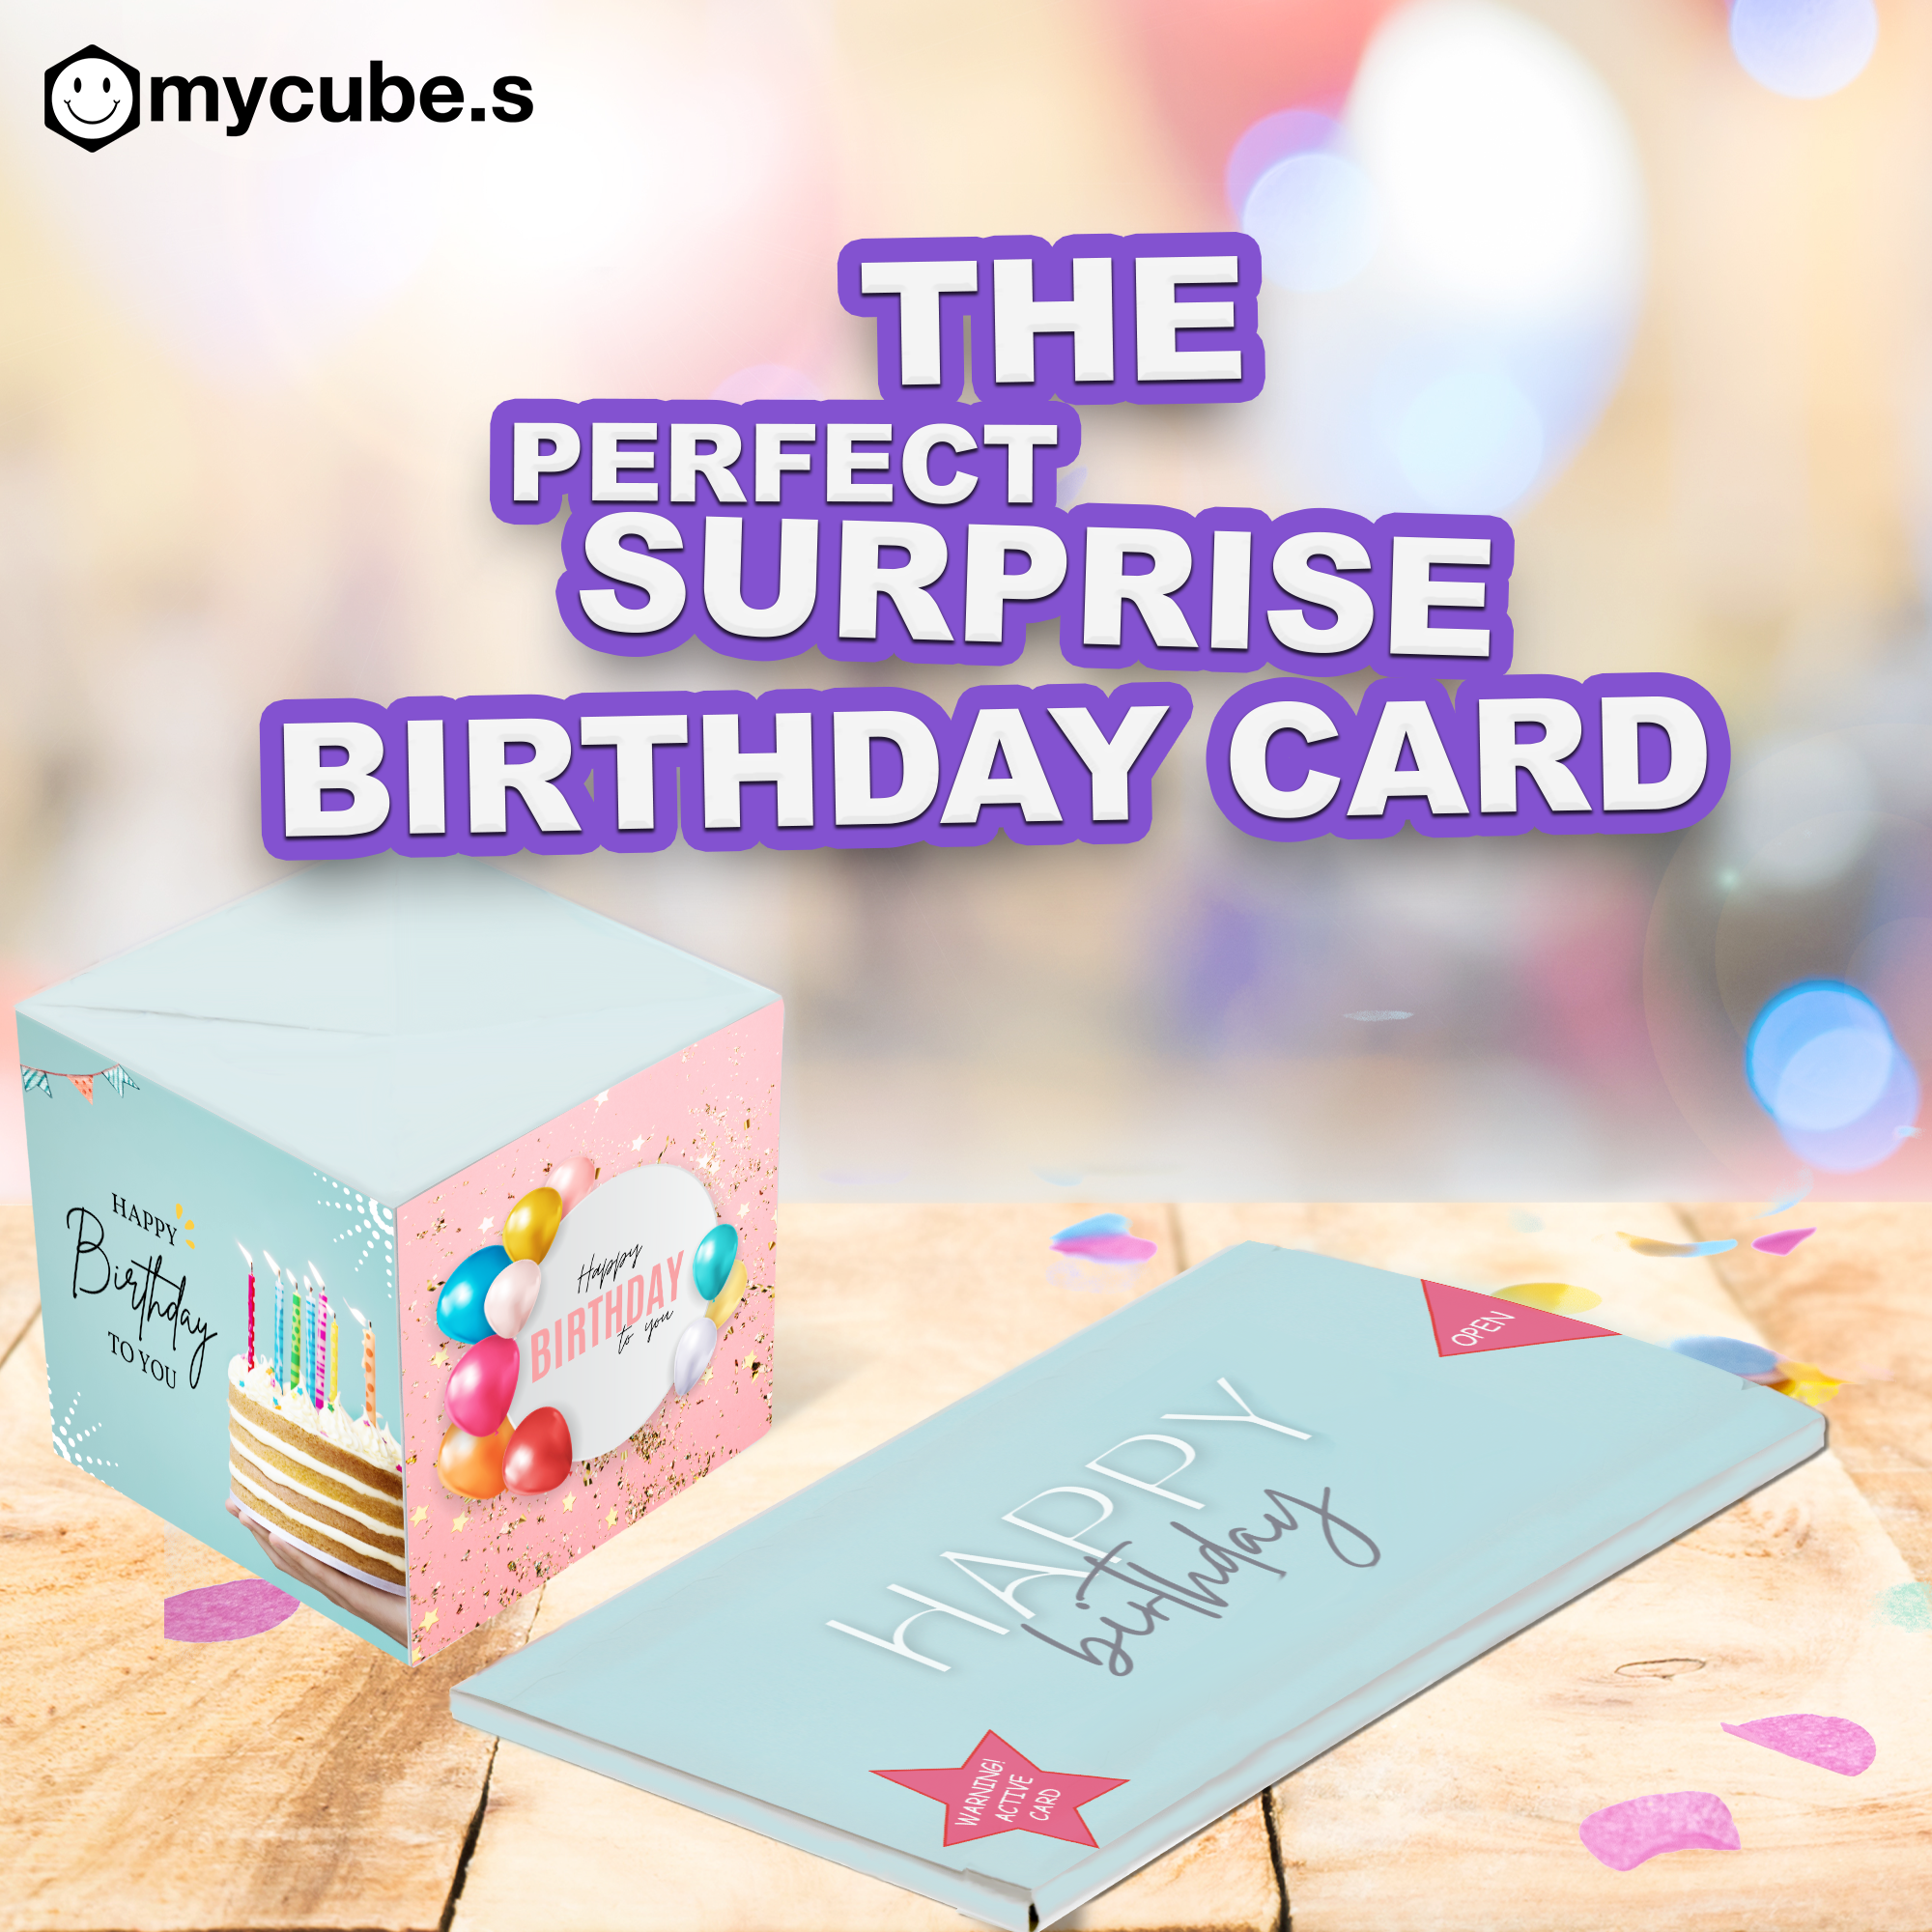 mycubes birthday card with the WOW effect